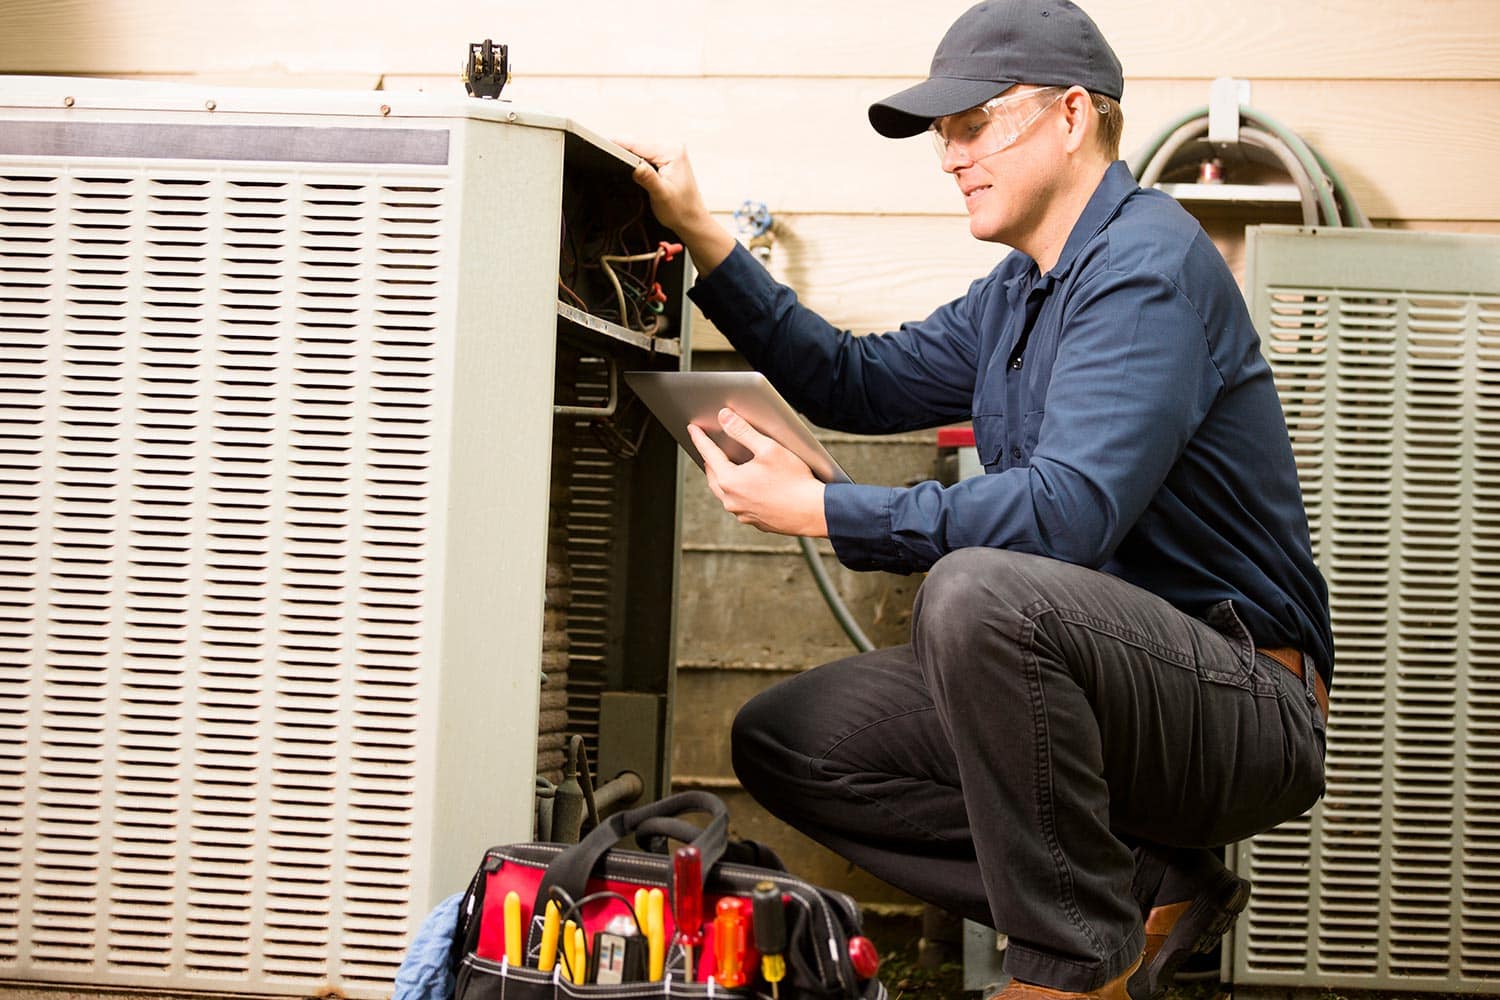 Air conditioner repairman works on home unit